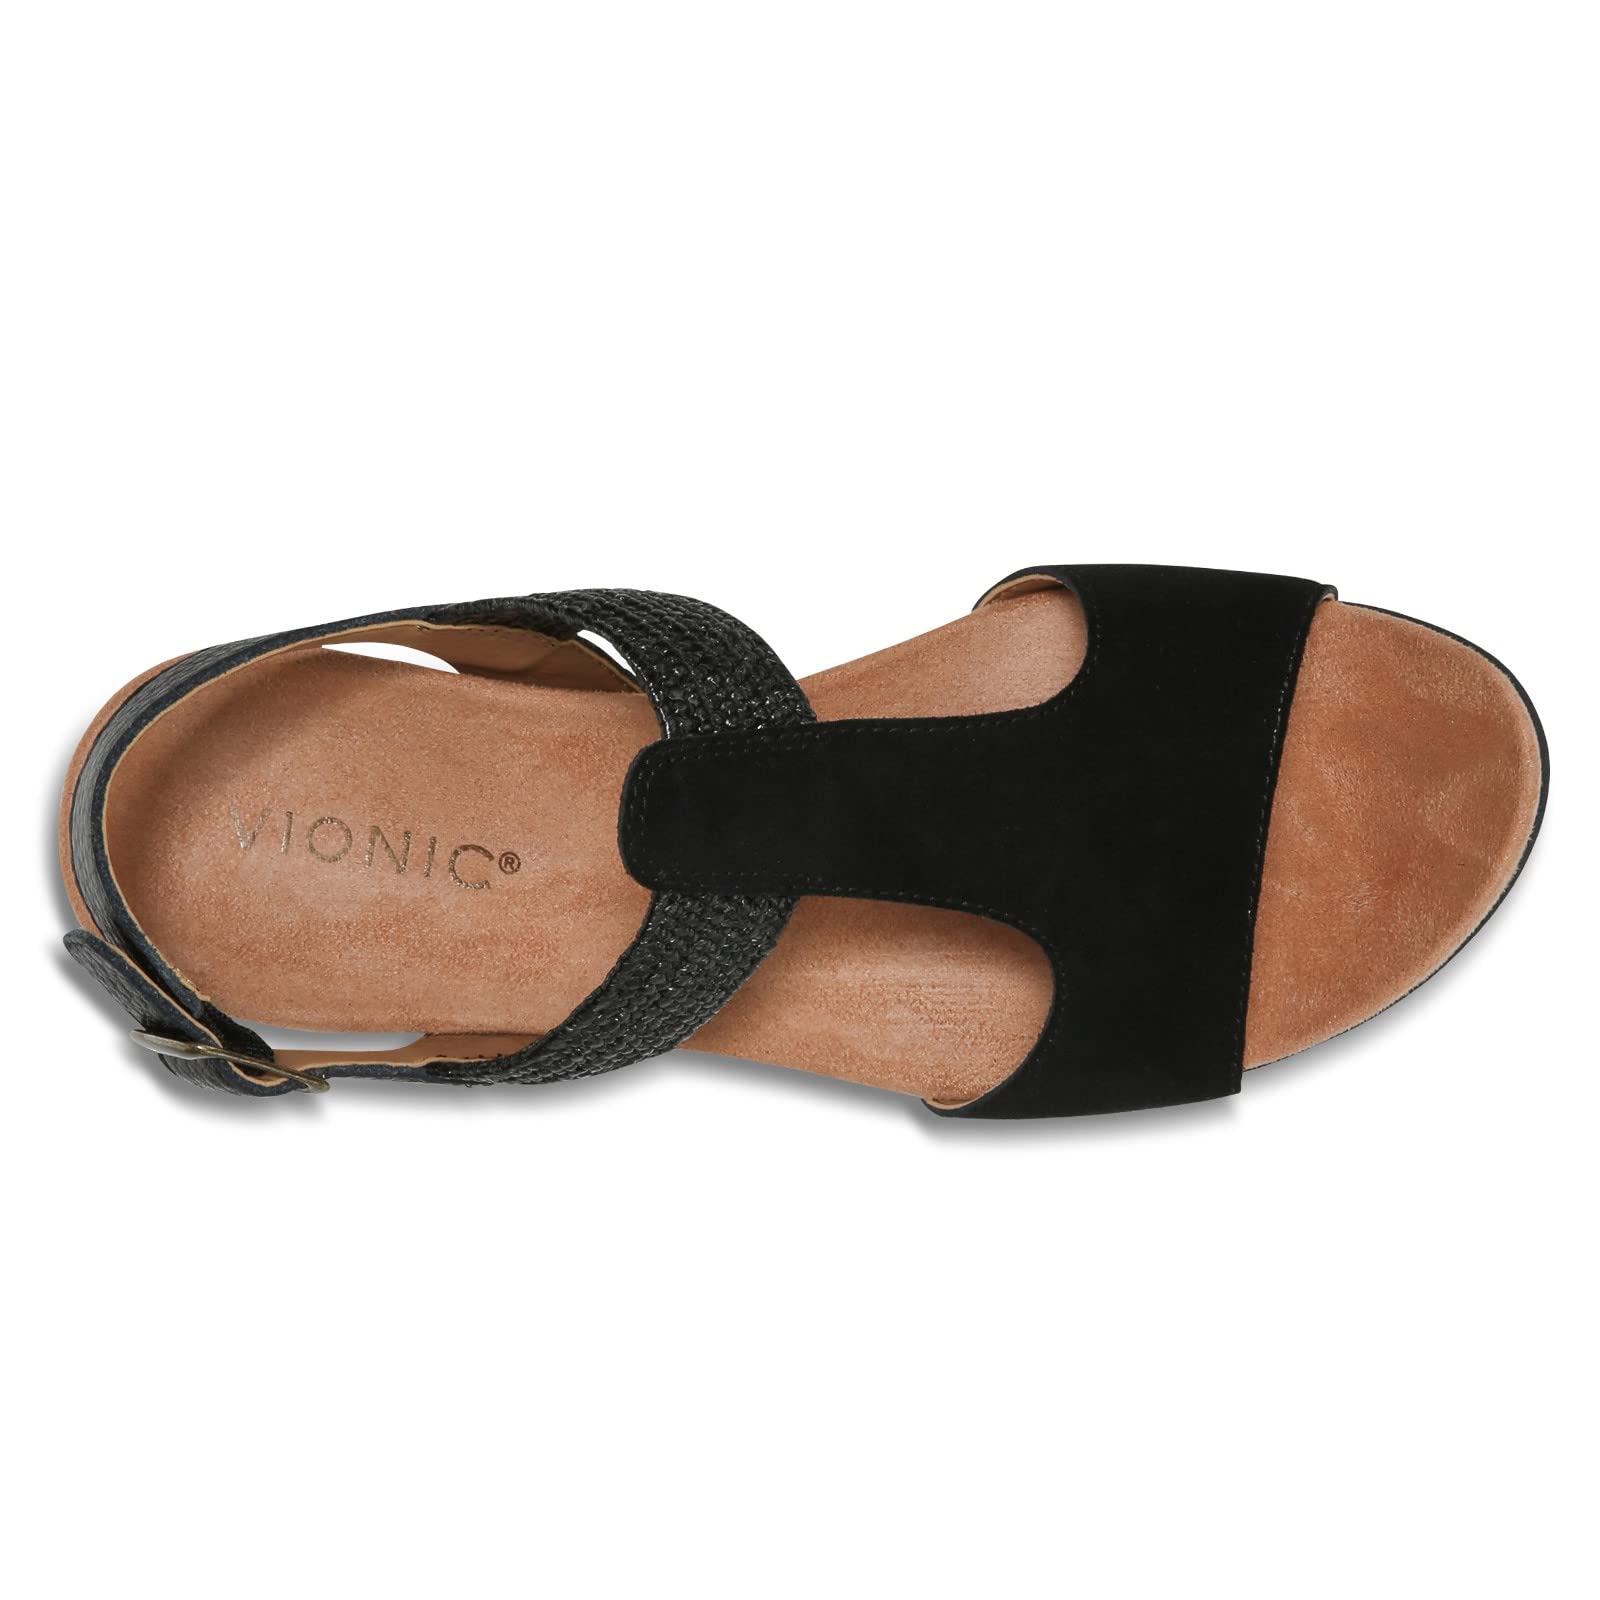 Vionic Women's Paradise Kaytie Backstrap Wedges - Supportive Ladies Suede and Jute Wedges That Include Three-Zone Comfort with Orthotic Insole Arch Support, Medium Fit